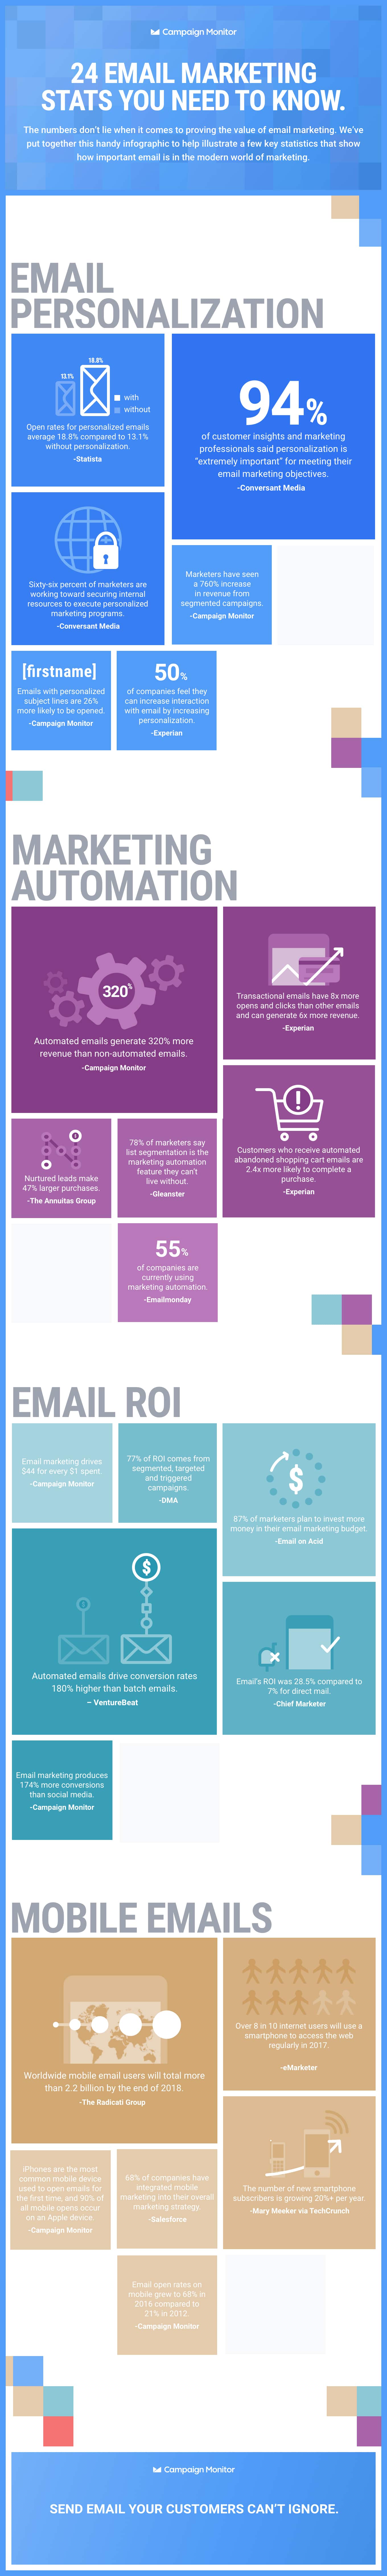 24 email marketing stats